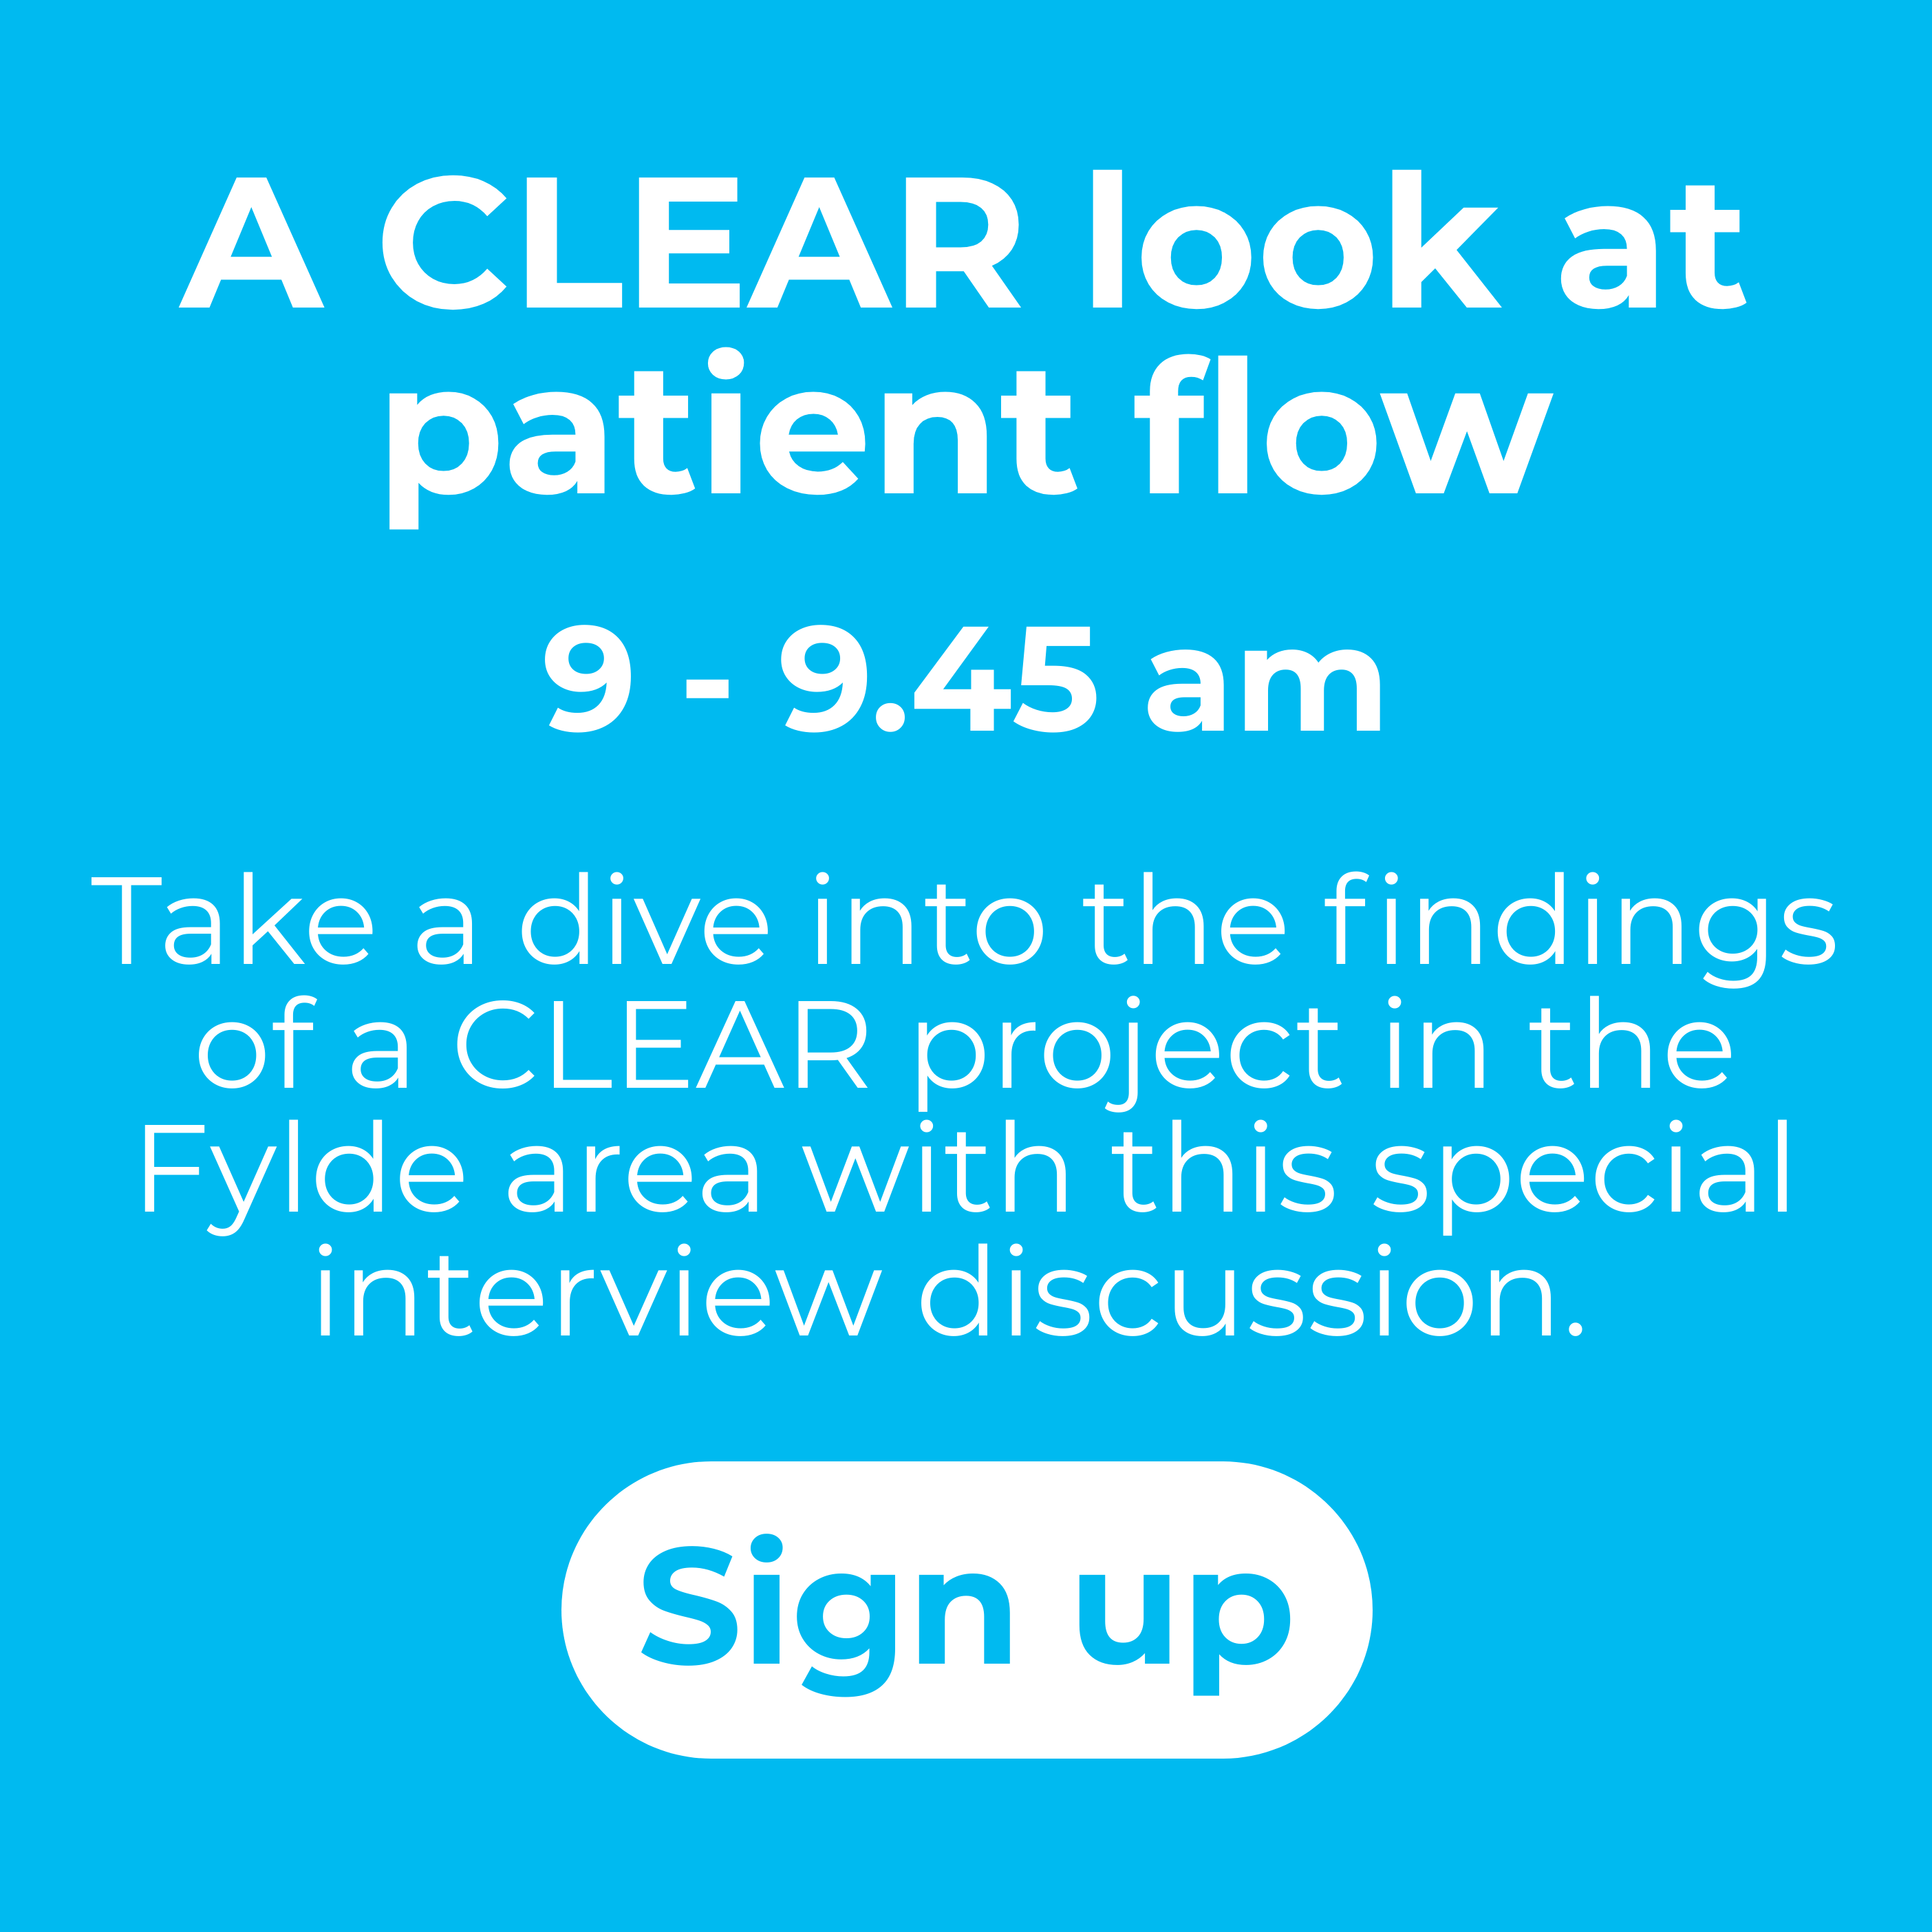 A CLEAR look at patient flow